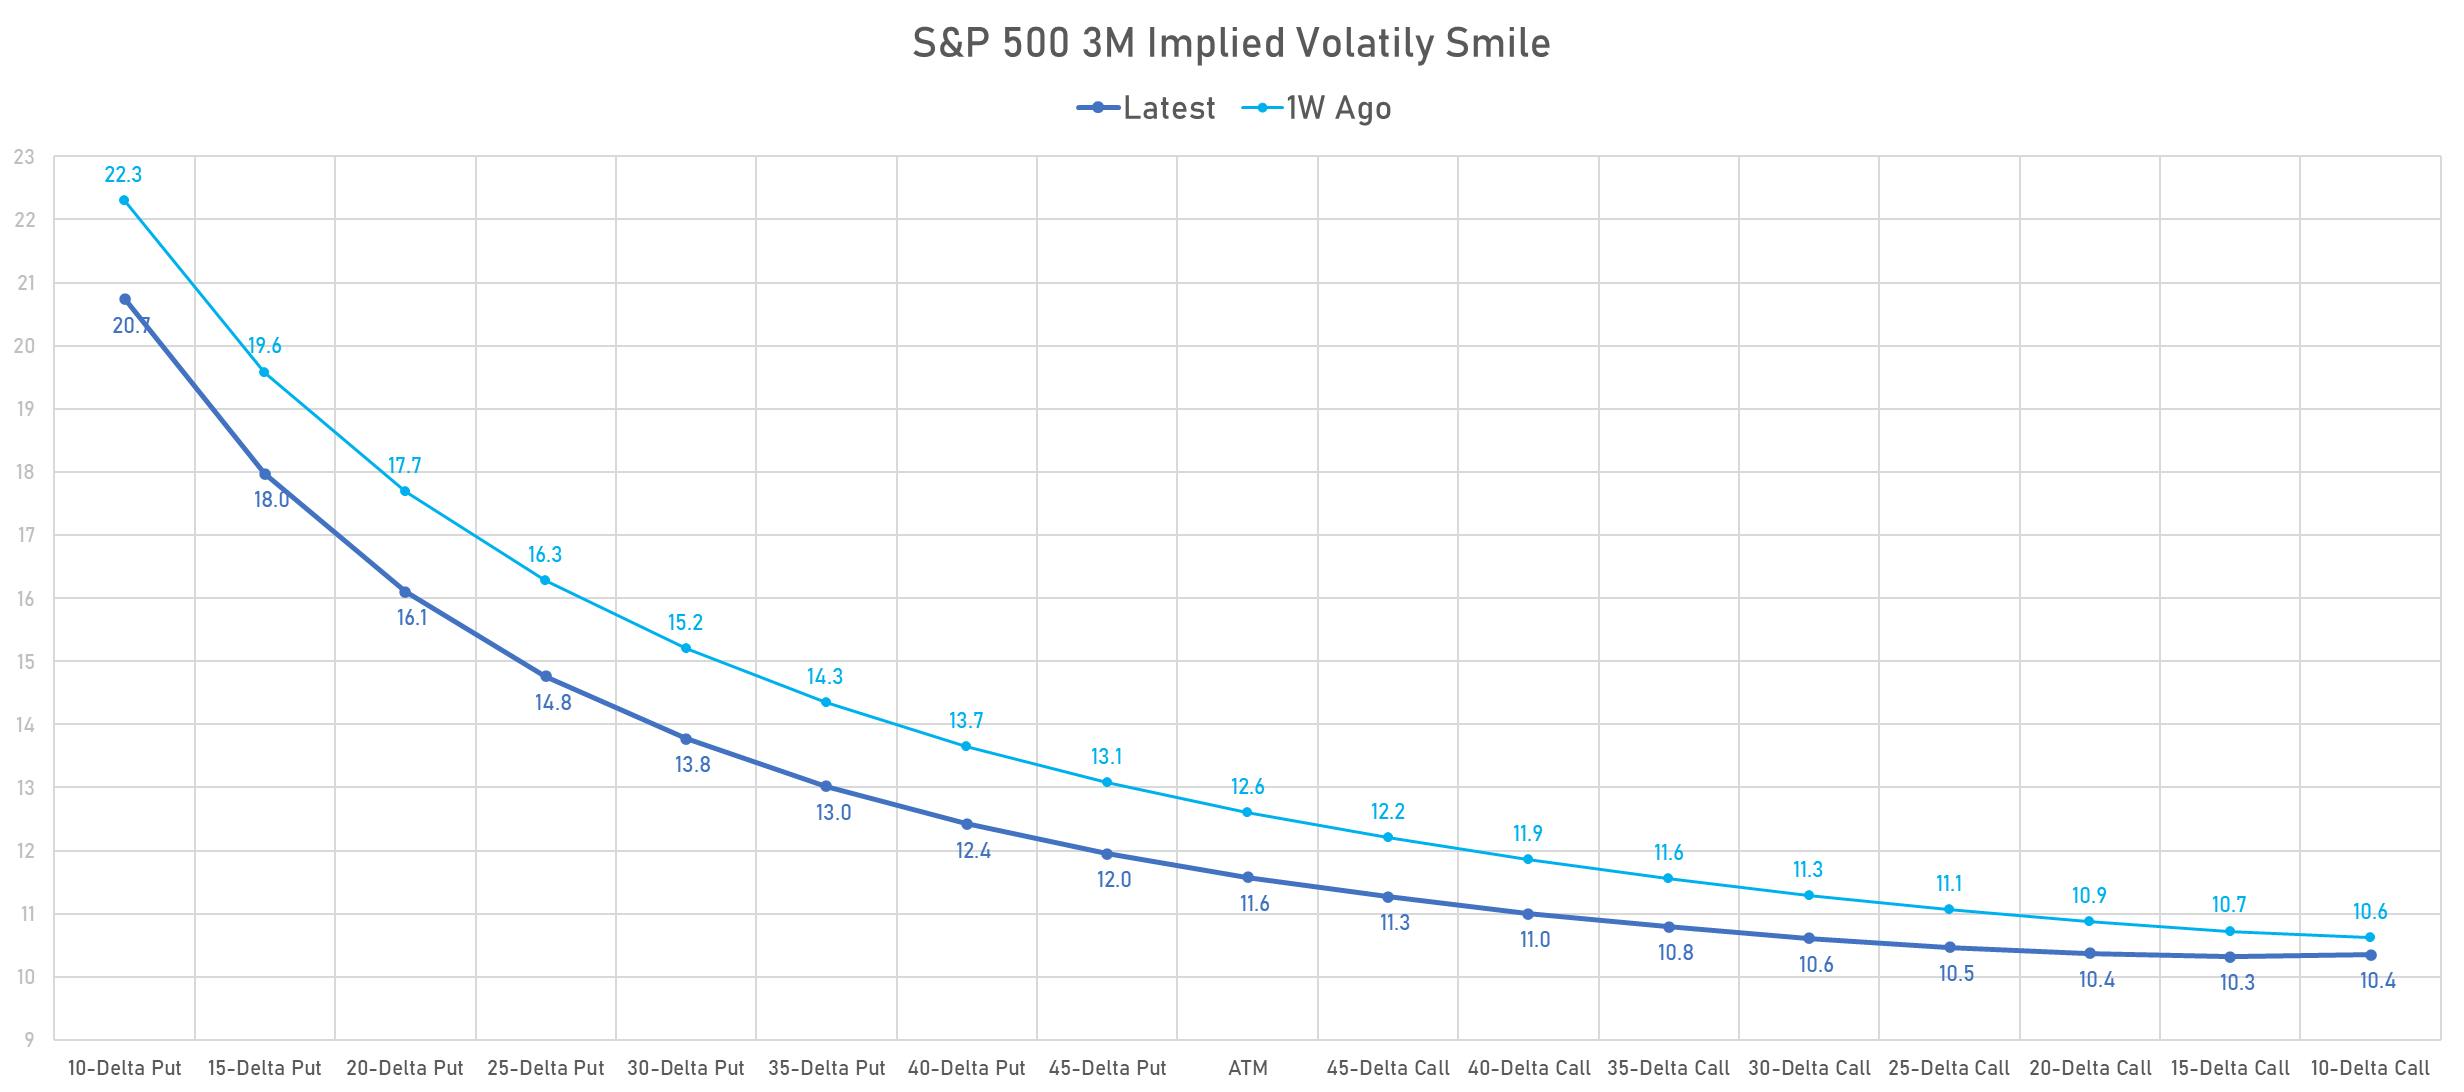 1 week change in 3-month S&P 500 implied volatility smile